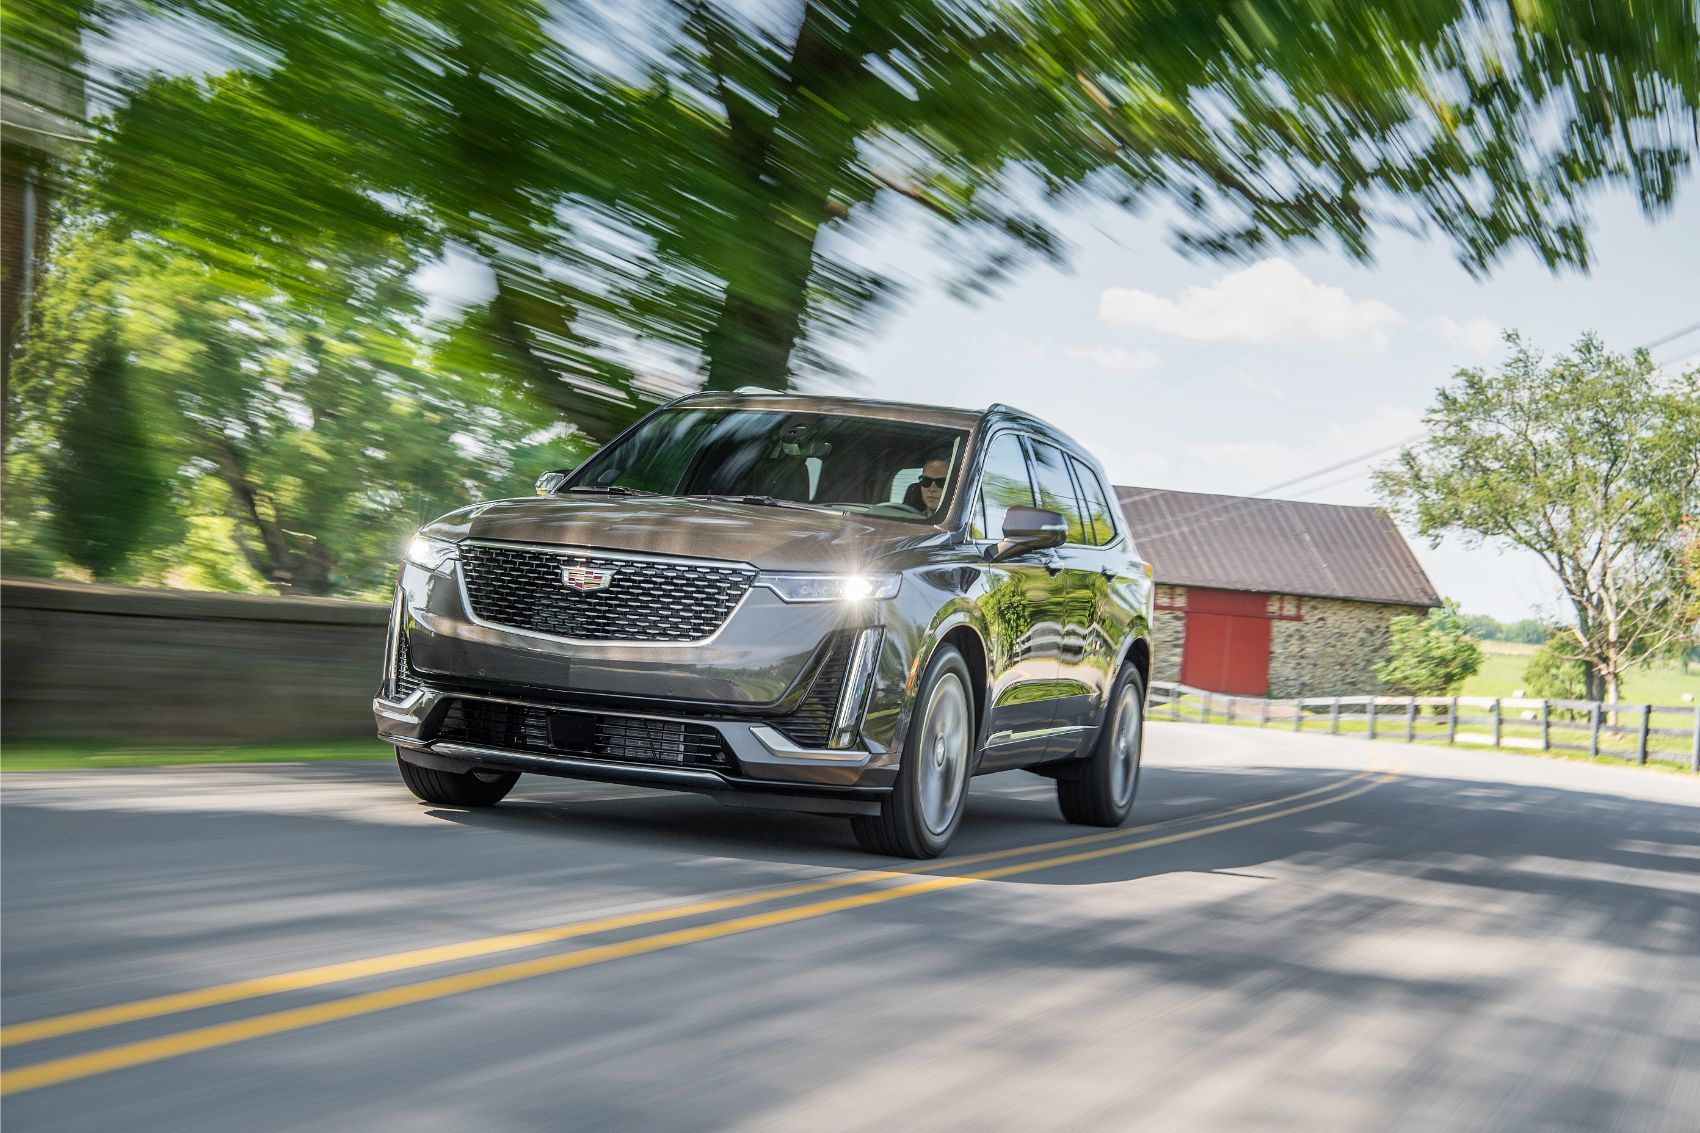 2020 Cadillac Xt6 Review Better Than The Escalade We Think So